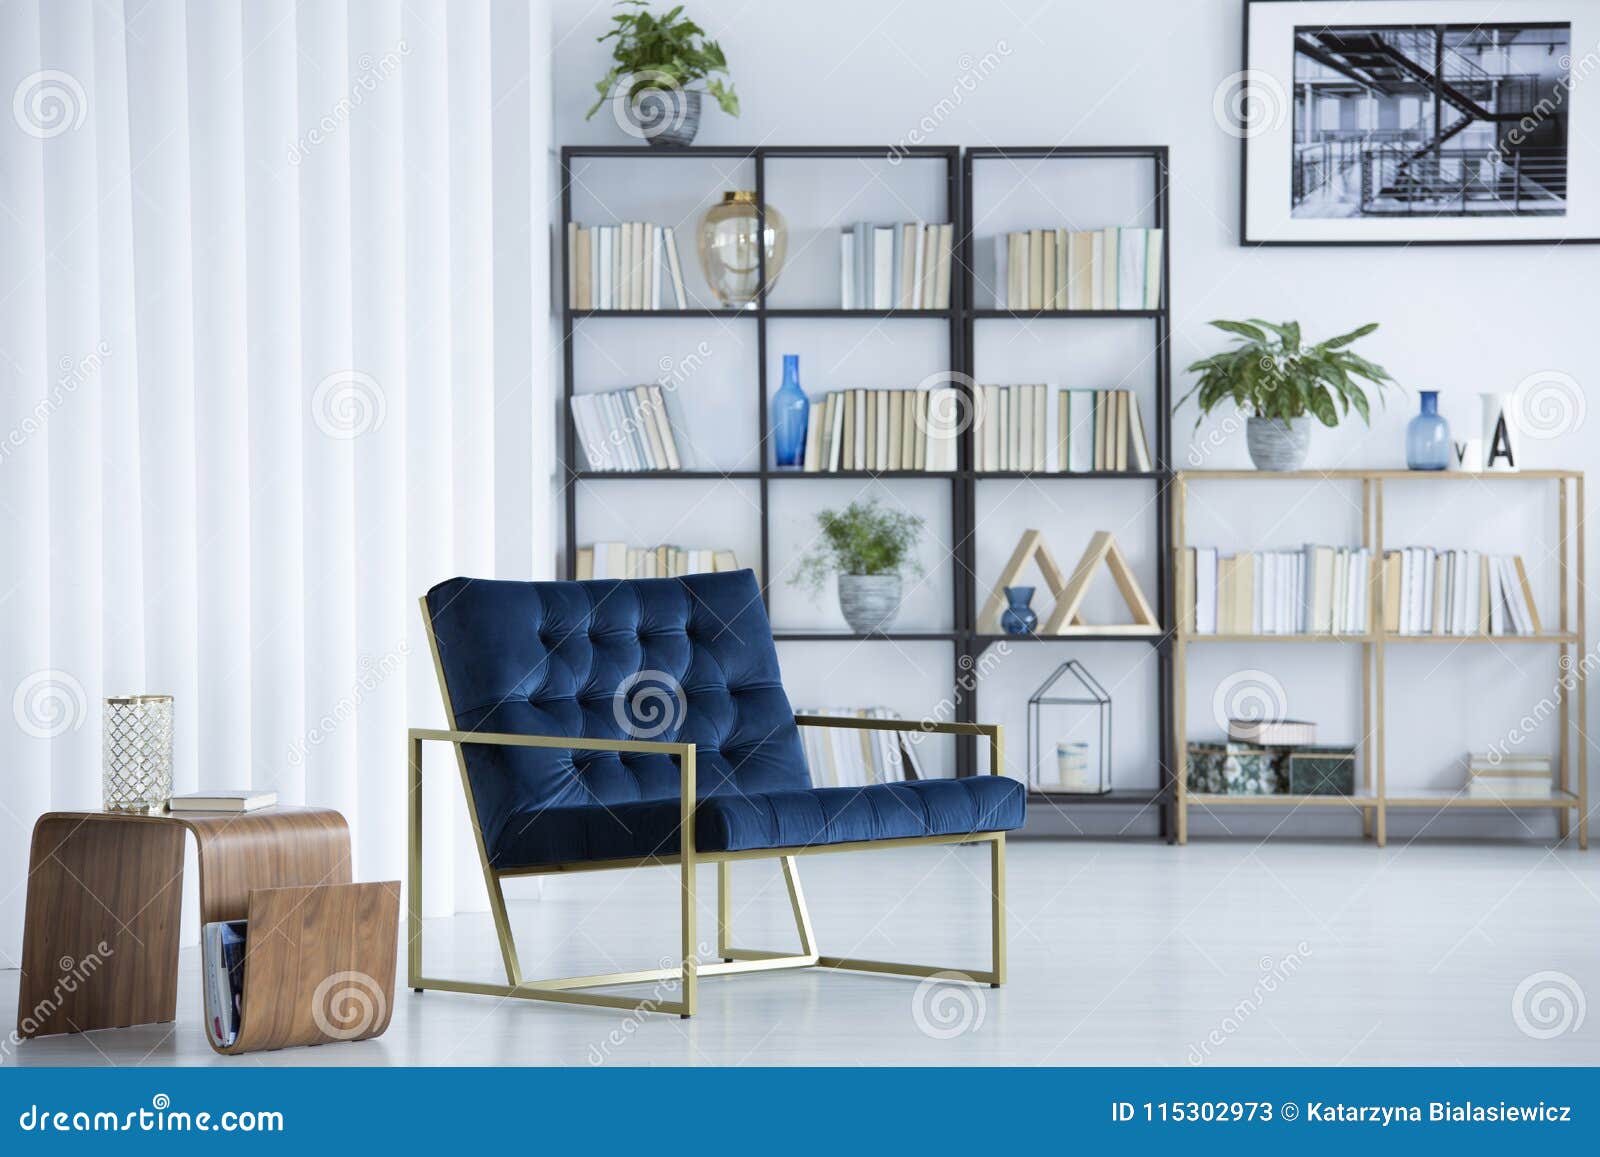 Navy Blue Armchair In Interior Stock Image Image Of Bright